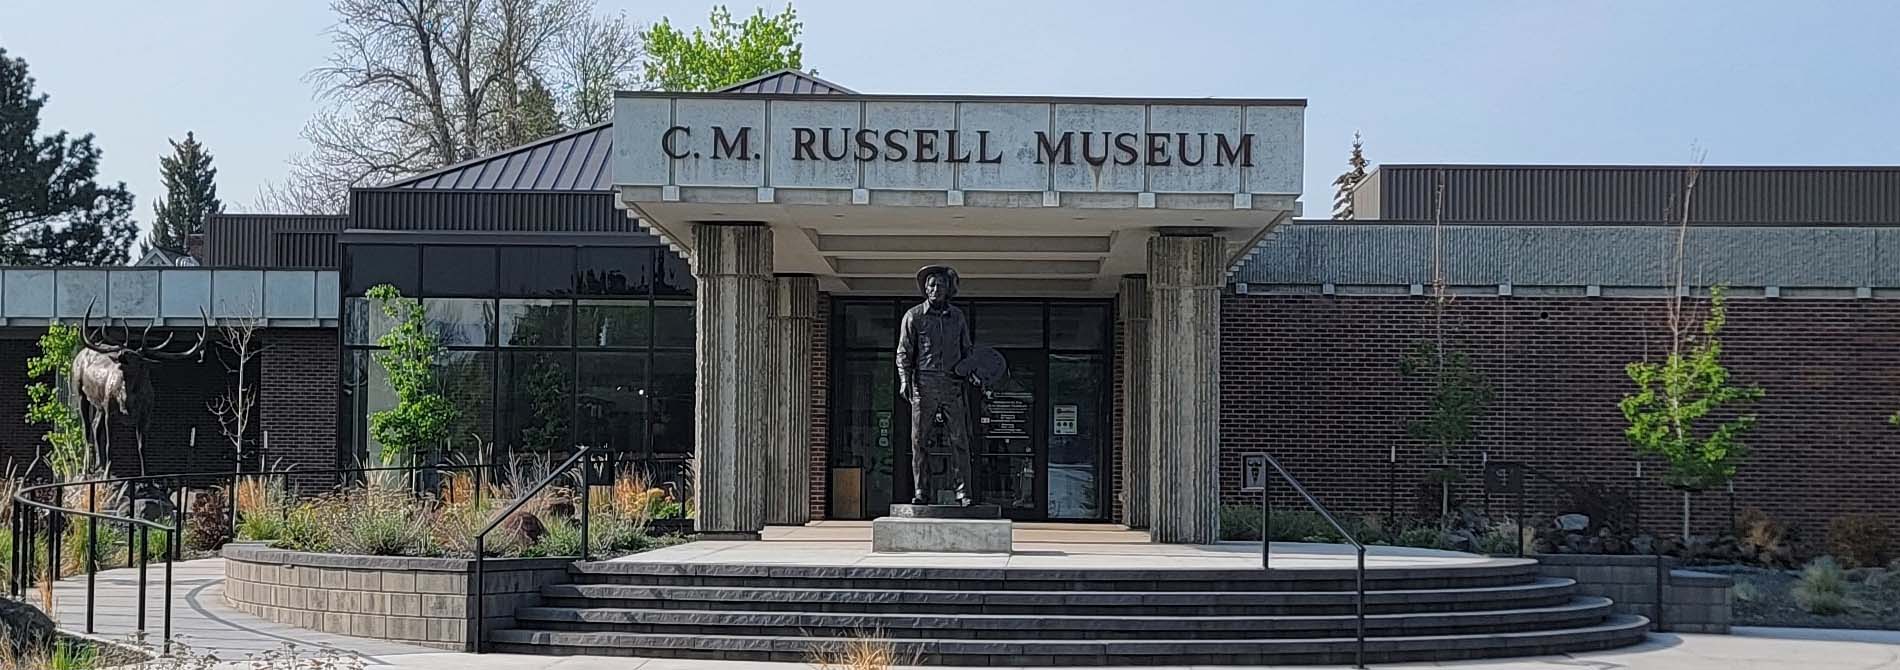 CM Russell Museum photo 2 kelly 2023 cropped